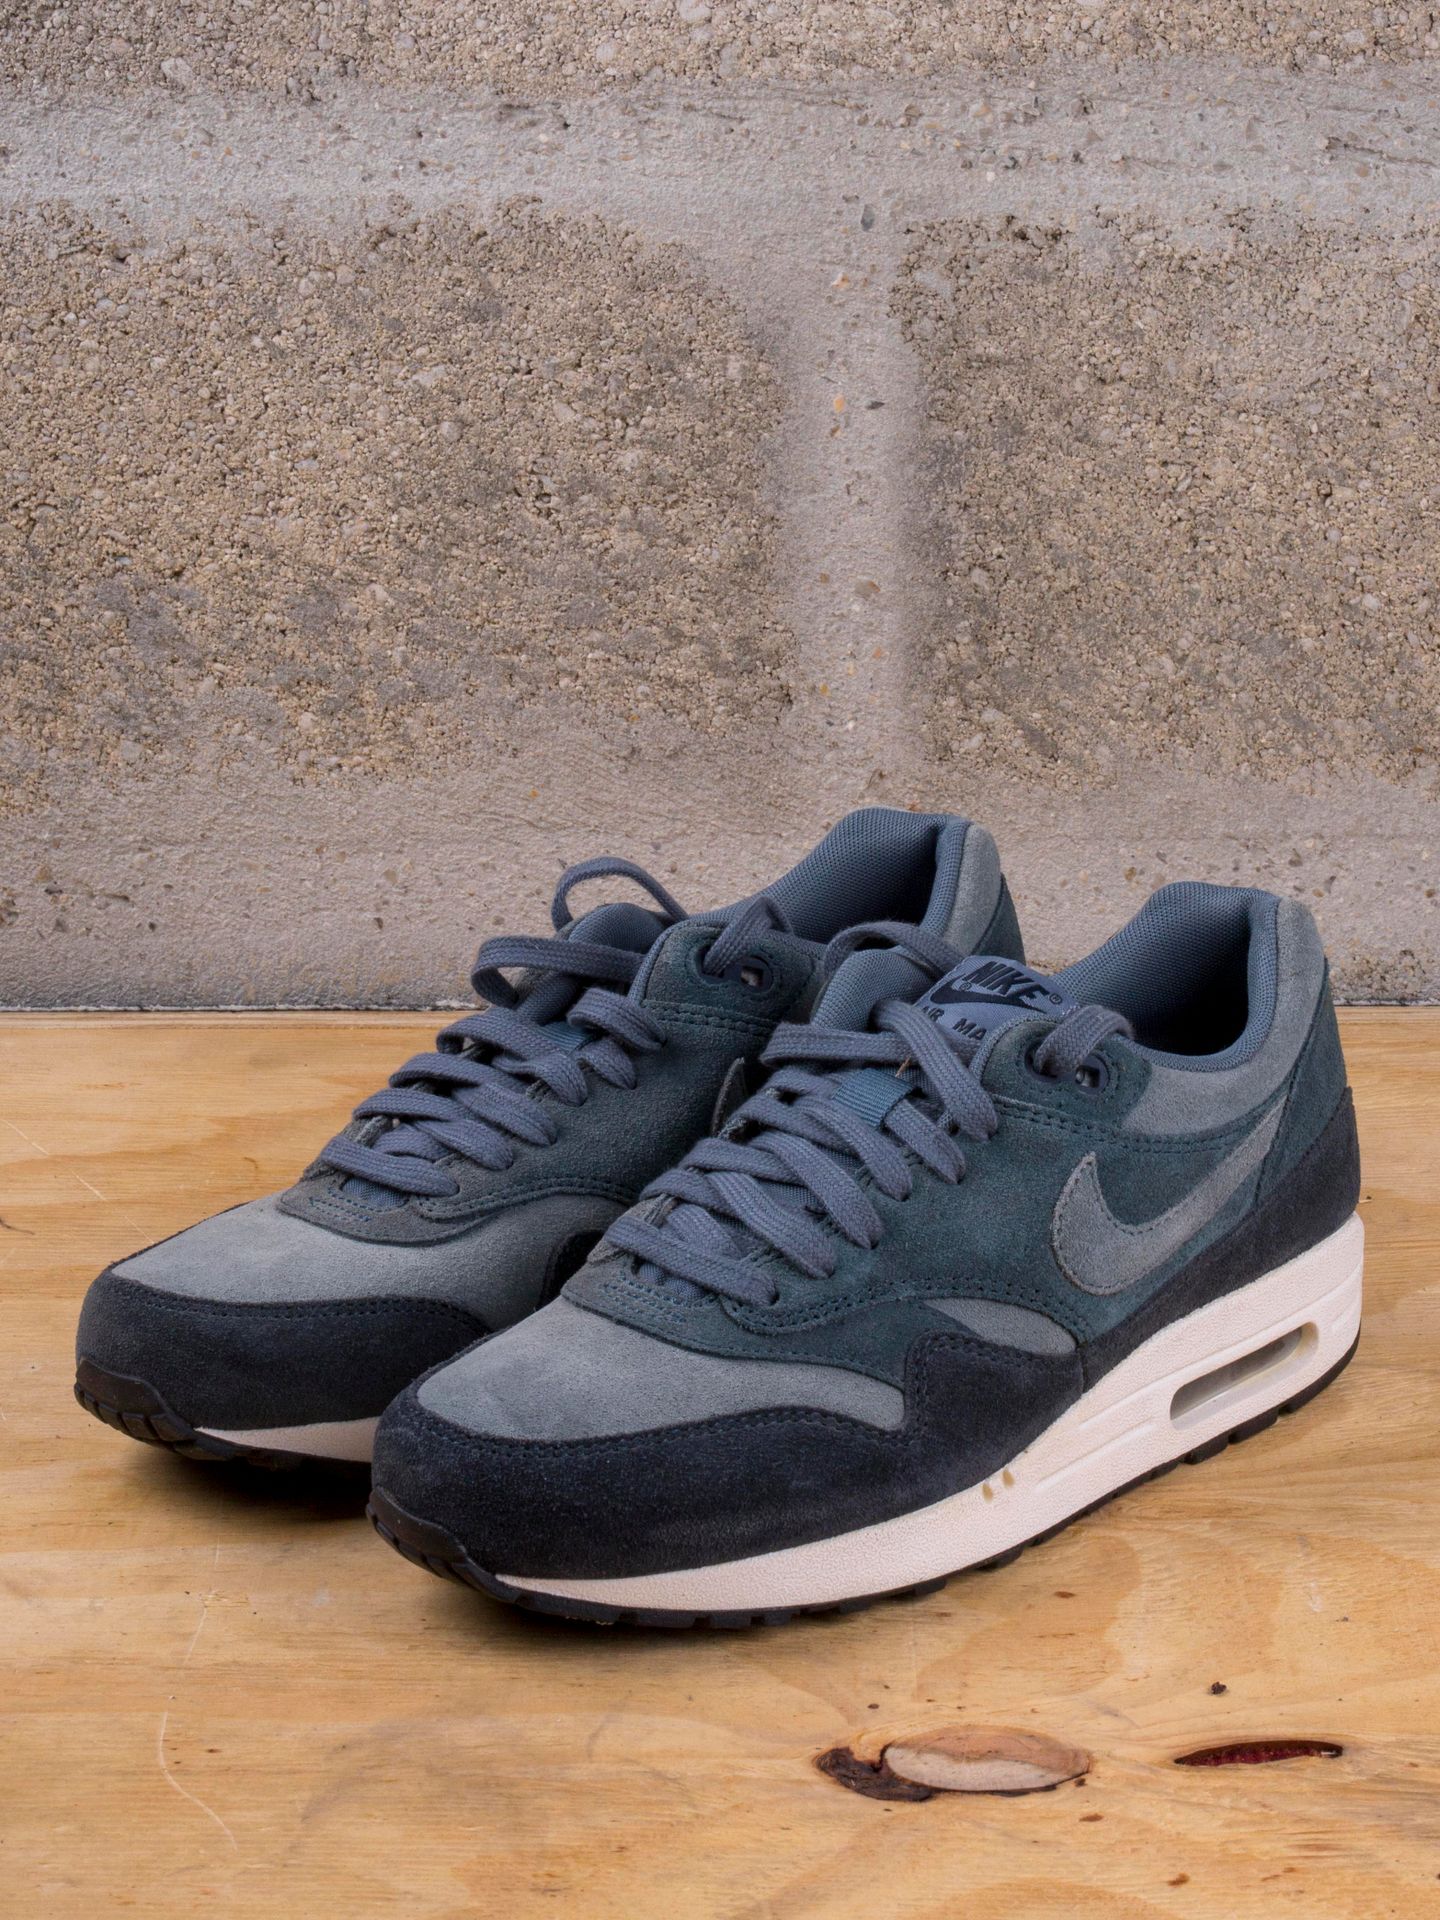 Null NIKE AIR MAX 1

Armory Slate

(599301-444)

US 8 / EU 41

(Very good condit&hellip;